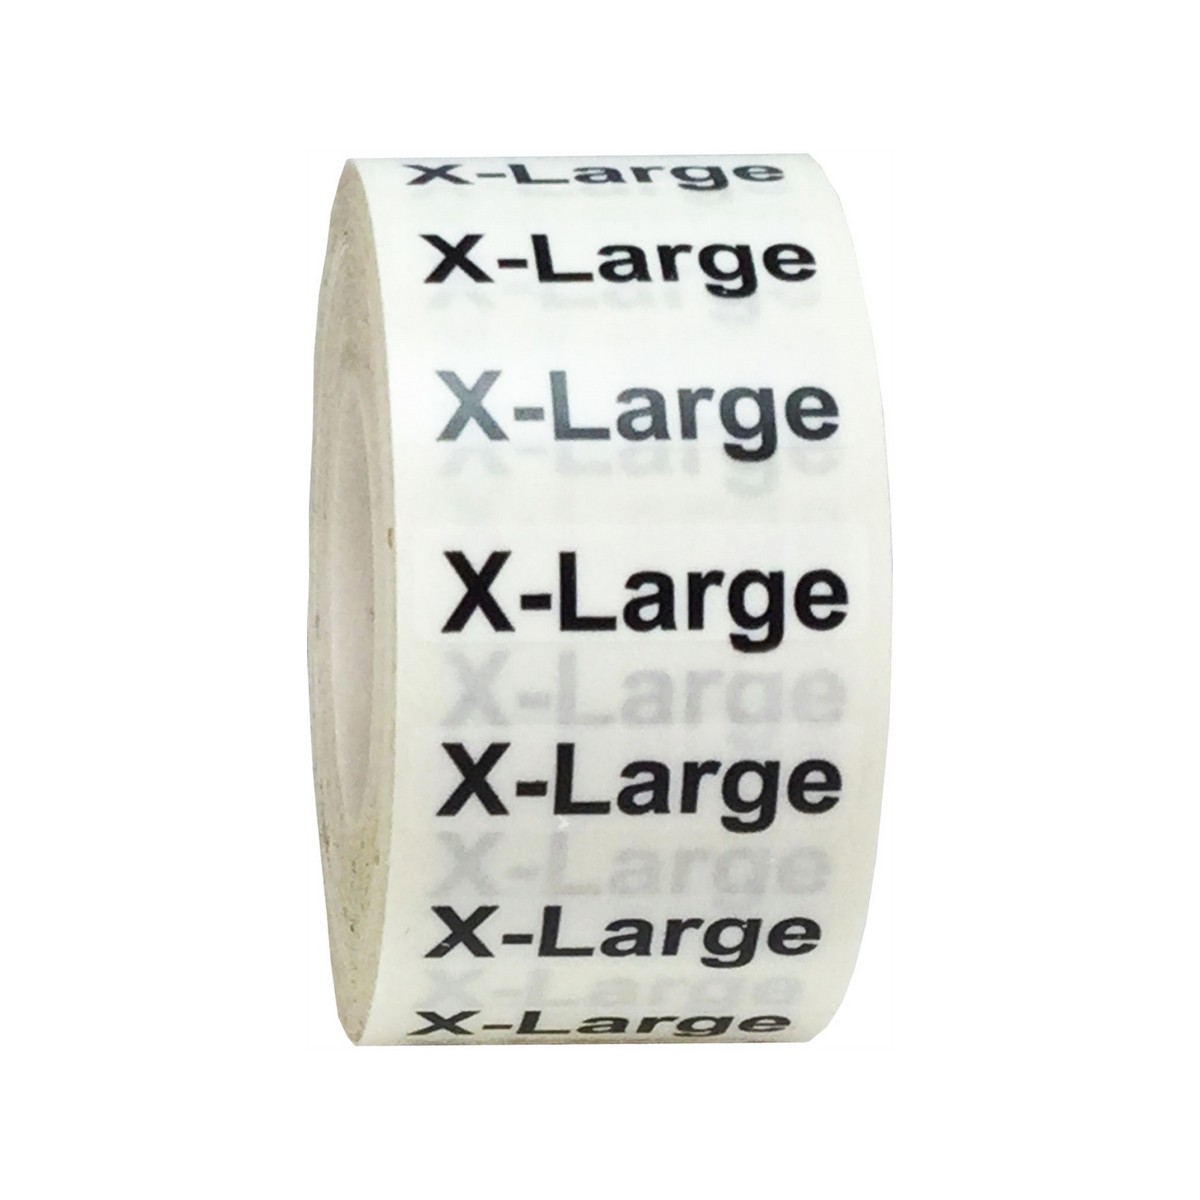 XXS-5XL Clear Clothing Size Strip Labels 125 Strips on a Roll 1.25 x 5 Inches 